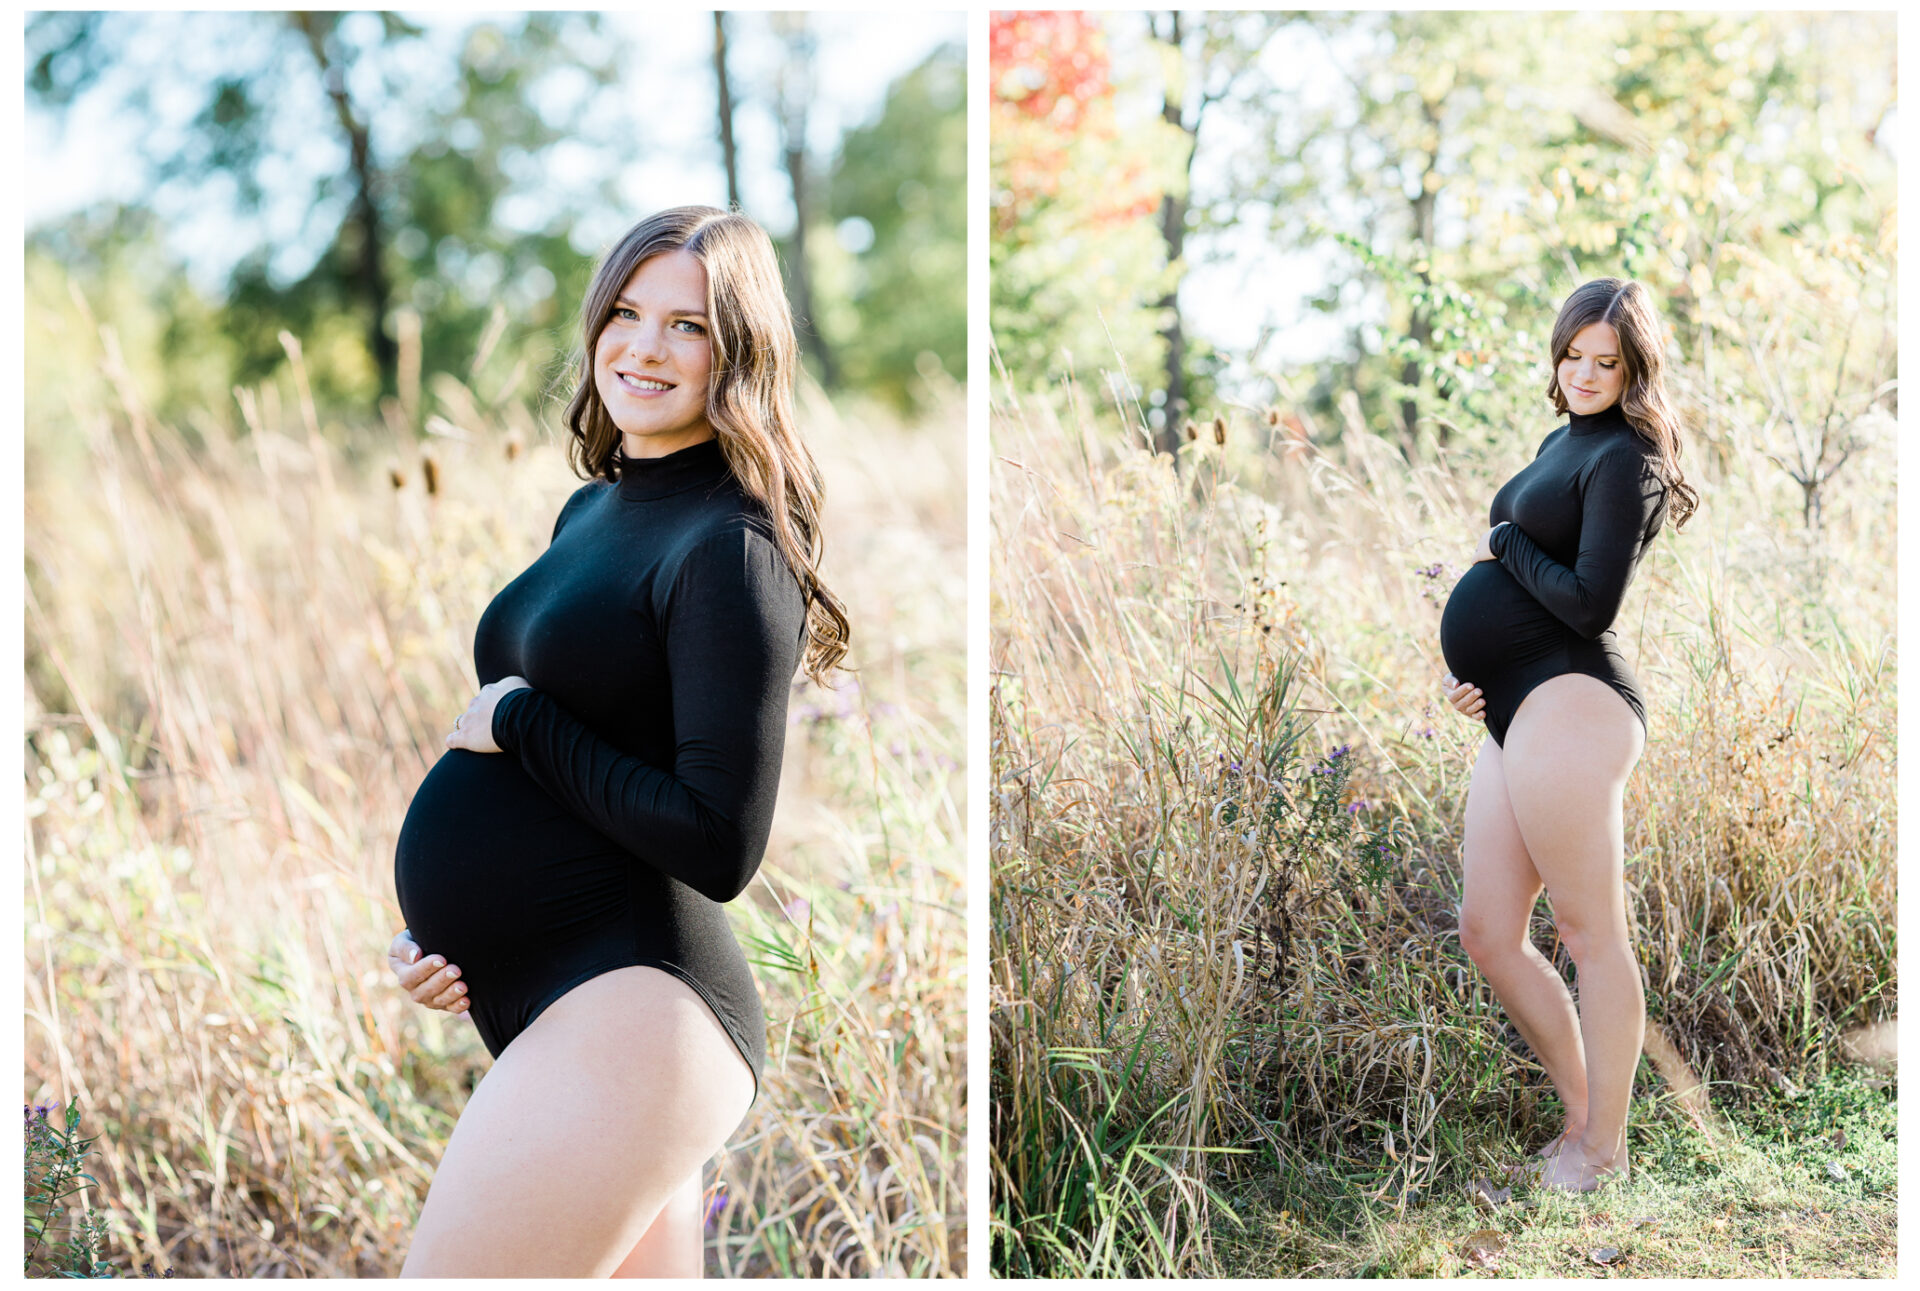 Winter Freire Photography | Natural Light Filled Maternity Session Dayton, OH | Outdoor Maternity Boudoir Photography | Organic Photography Ohio